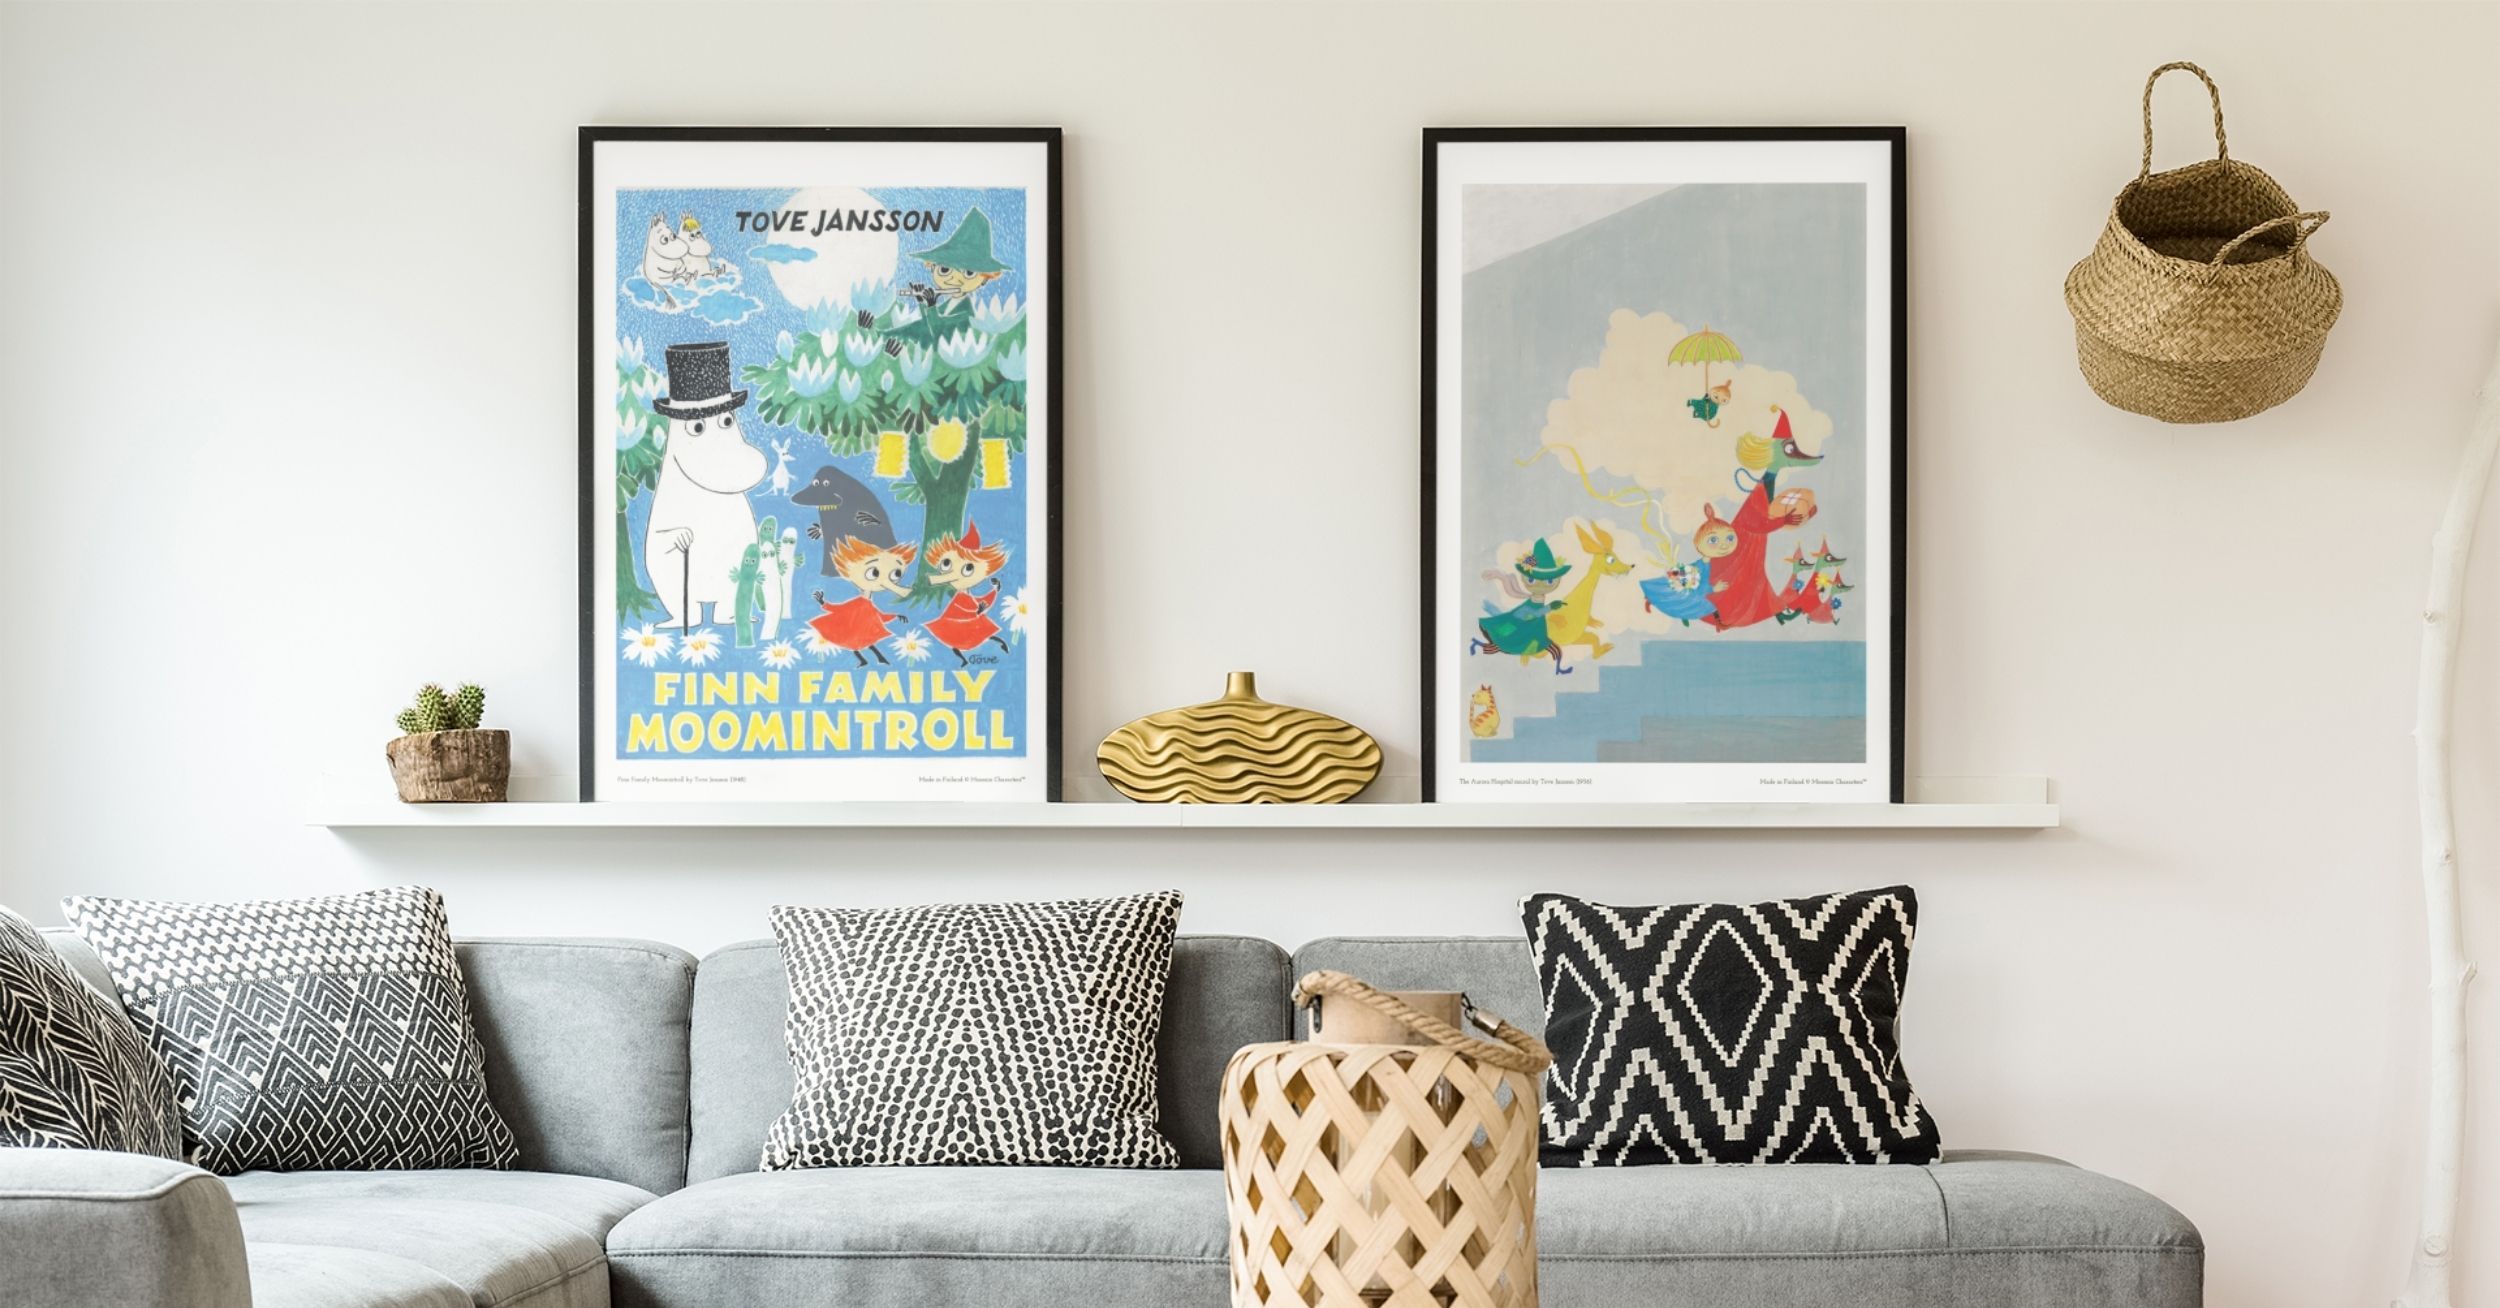 Decorate your home with Moomin posters - Blog - Moomin.com